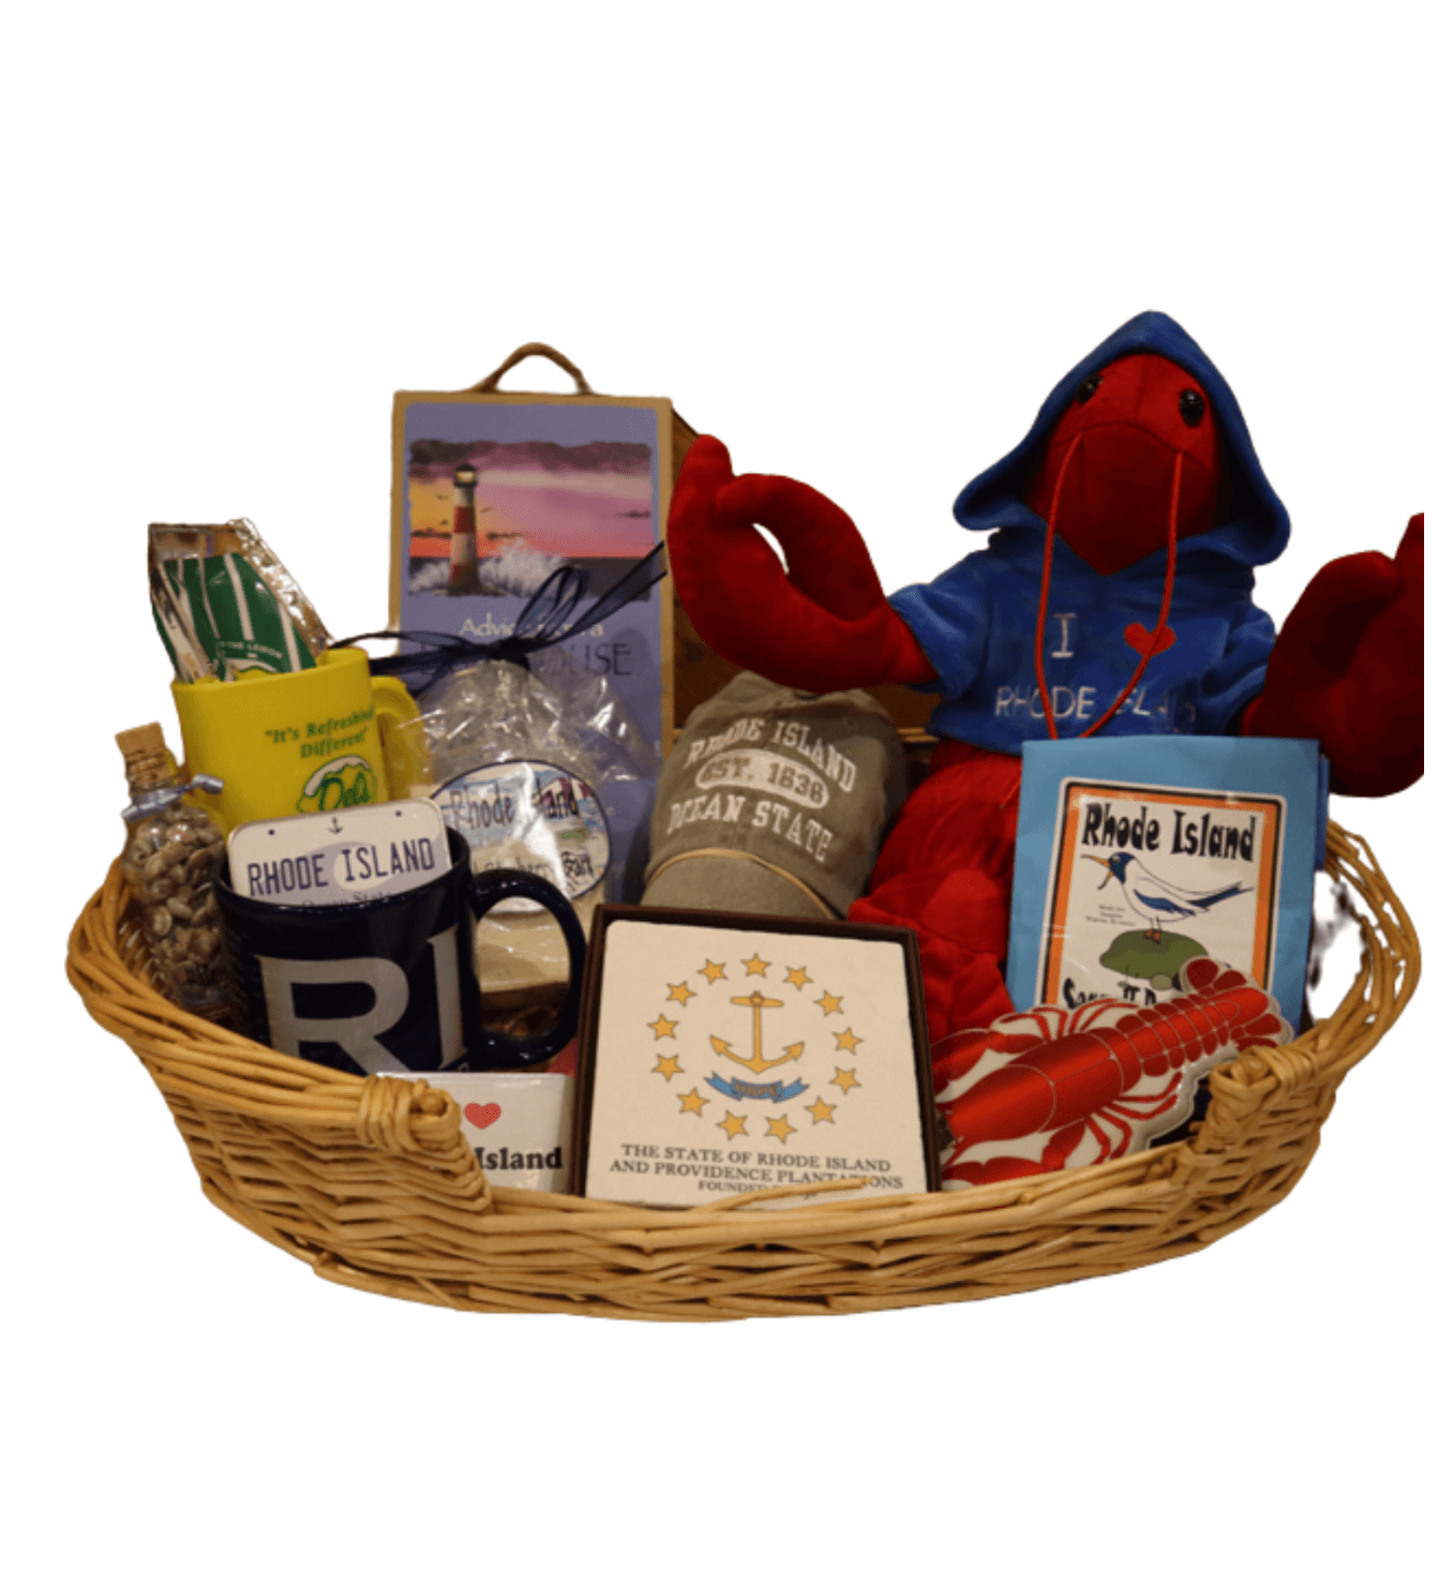 Wedding favor that is a basket, featuring many Rhode Island souvenirs and products.